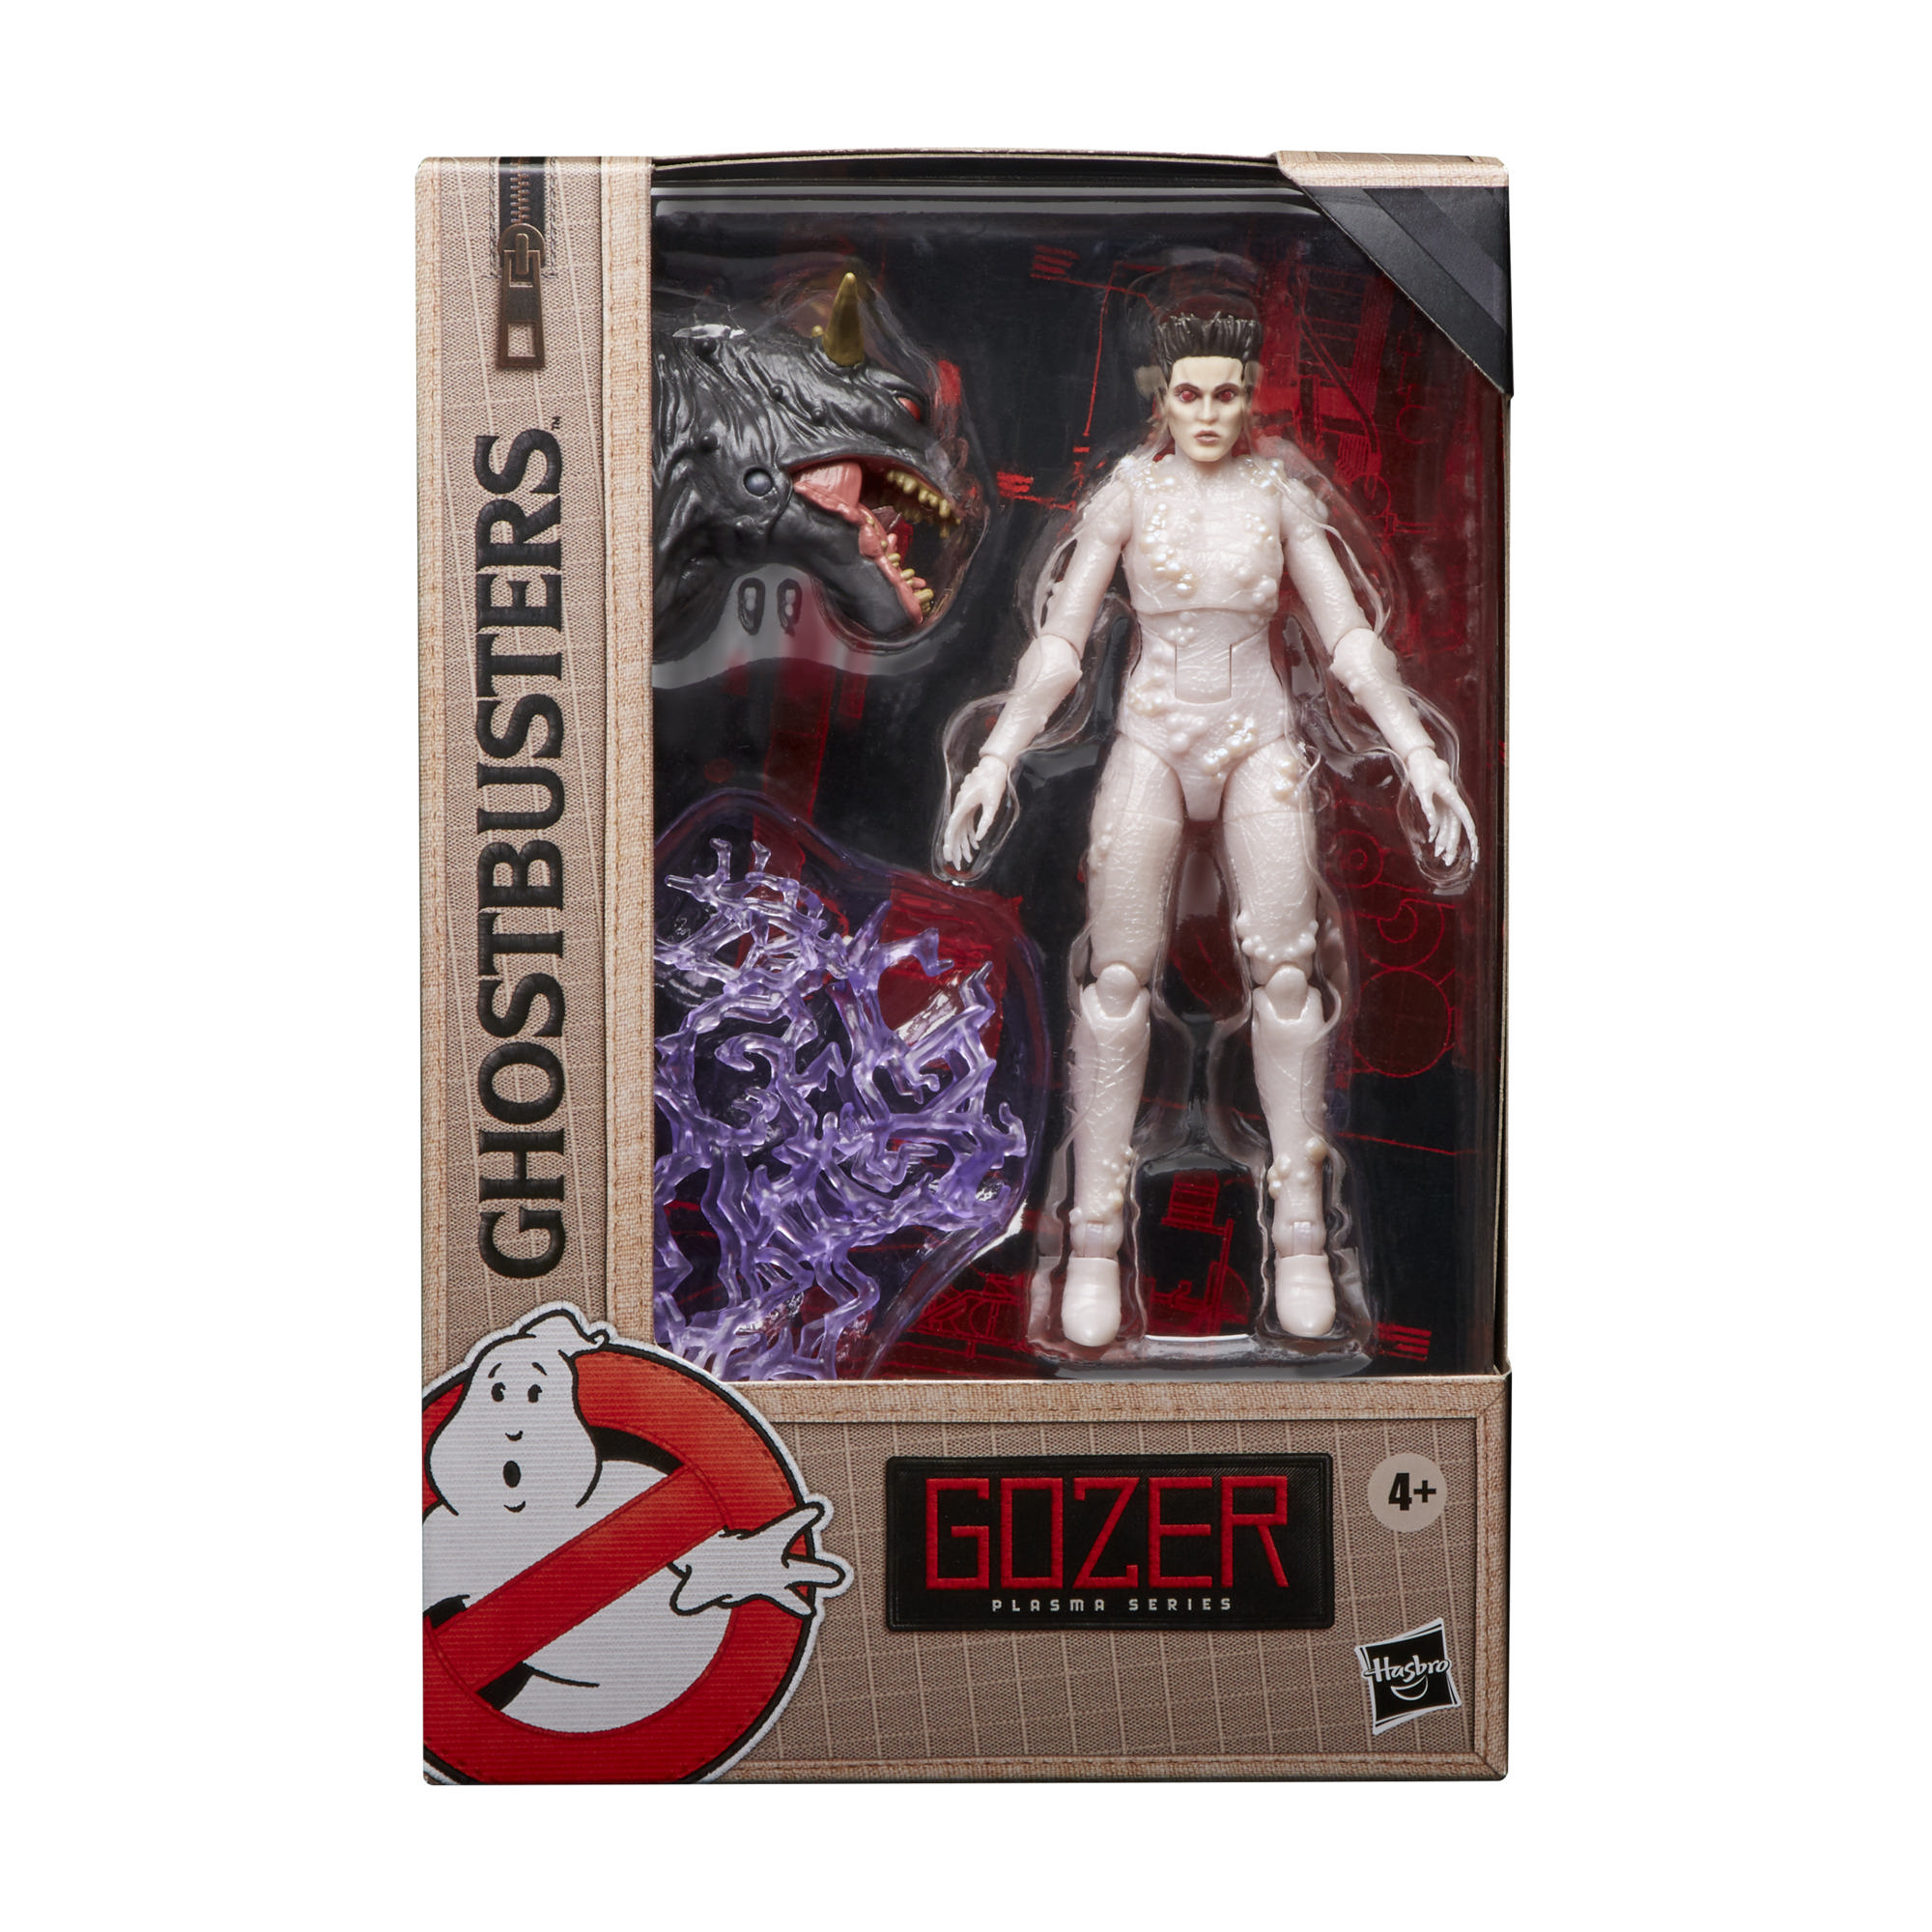 Ghostbusters Plasma Series Gozer Toy 6-Inch-Scale Collectible 